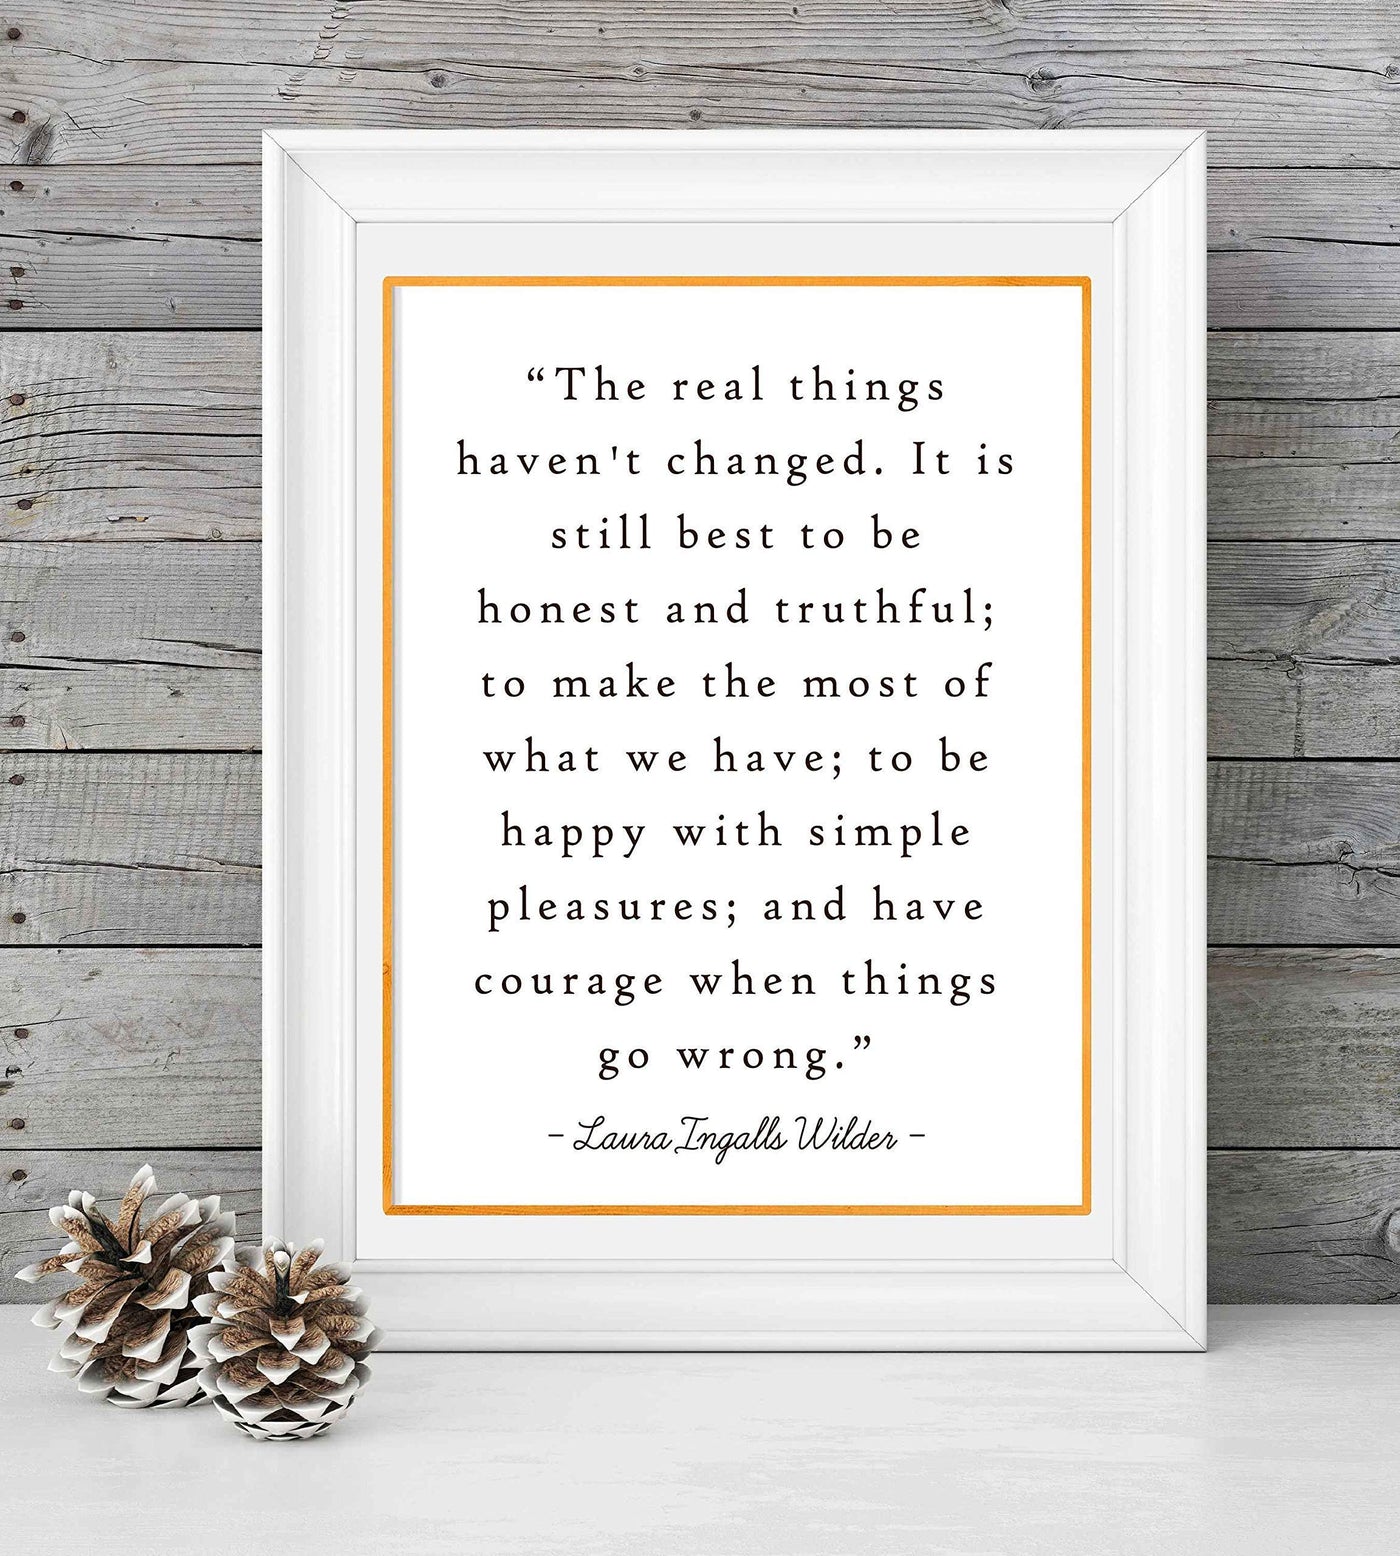 Laura Ingalls Wilder Quotes-"The Real Things Haven't Changed" -Inspirational Wall Art Sign-8 x 10"-Ready to Frame. Motivational Poster Print Ideal for Home-Office-Studio-School-Dorm Decor.